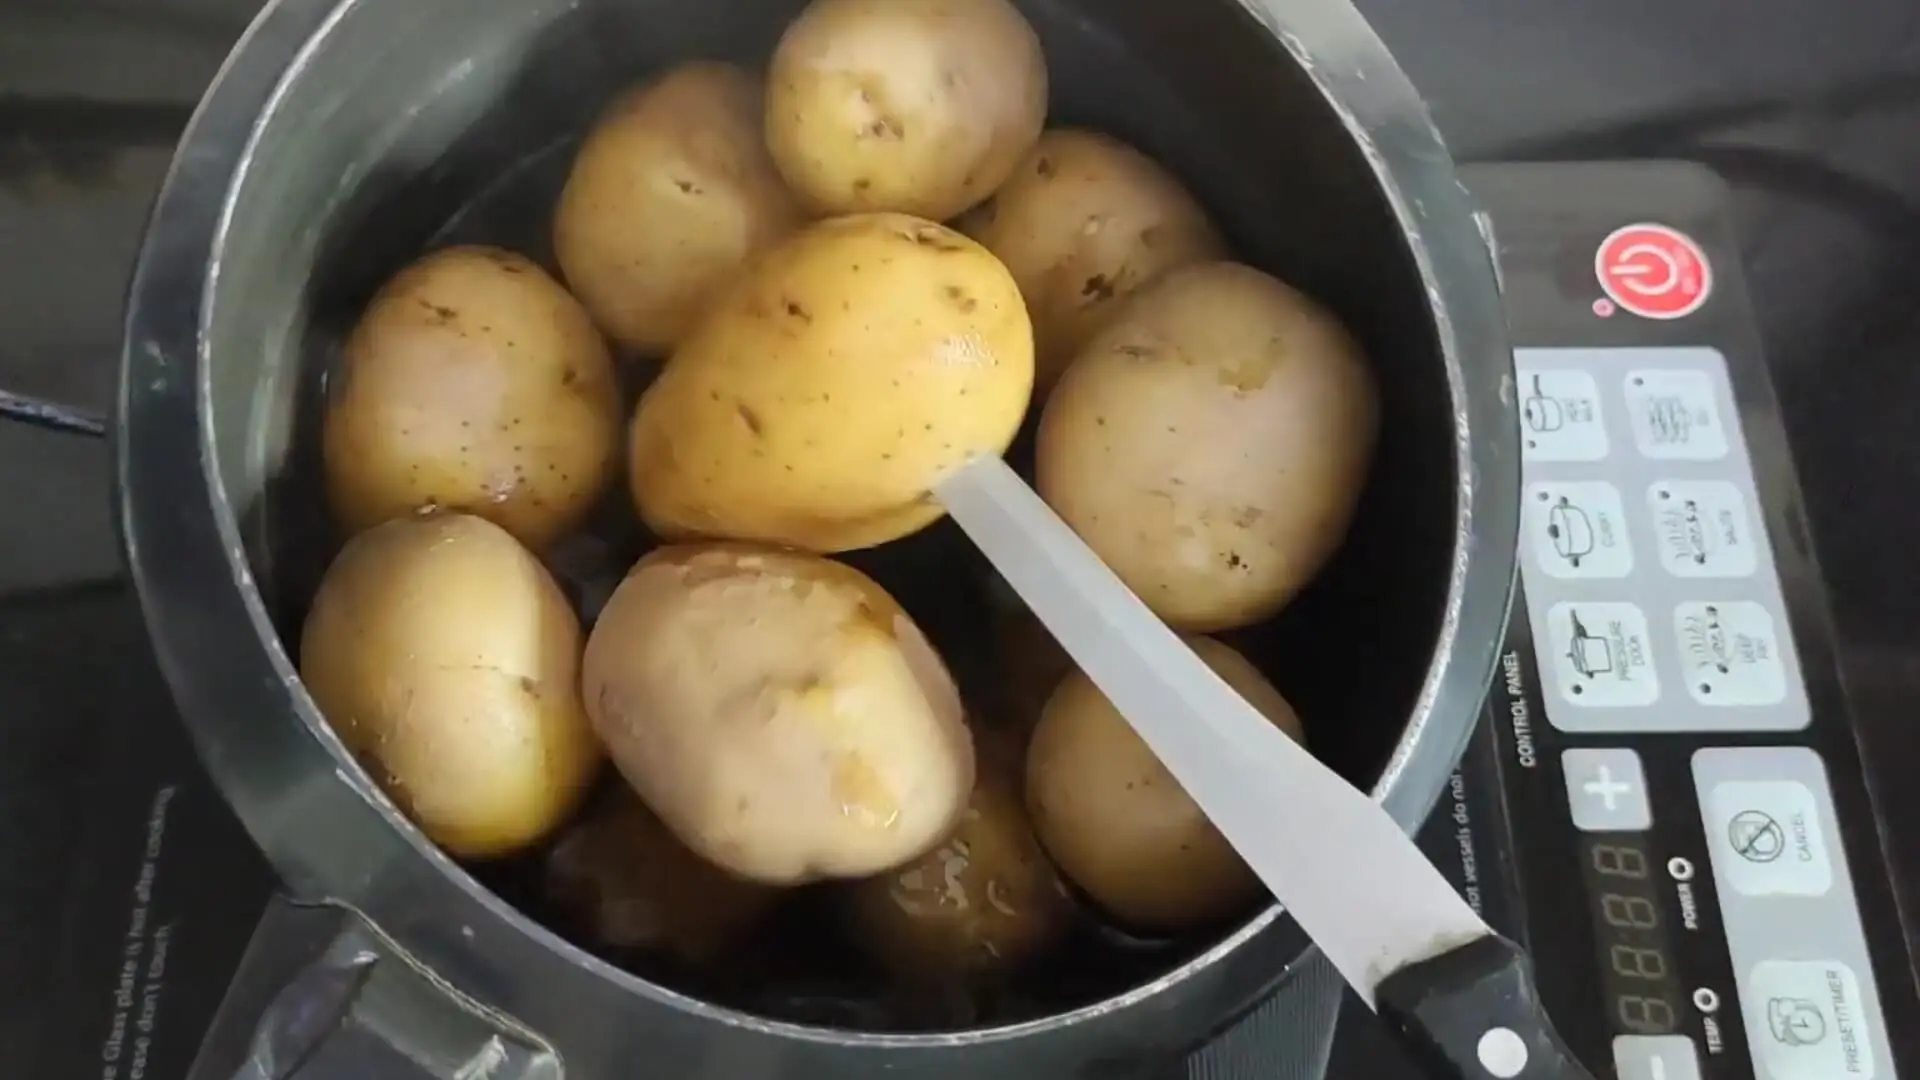 Release the Pressure and Test The Potatoes